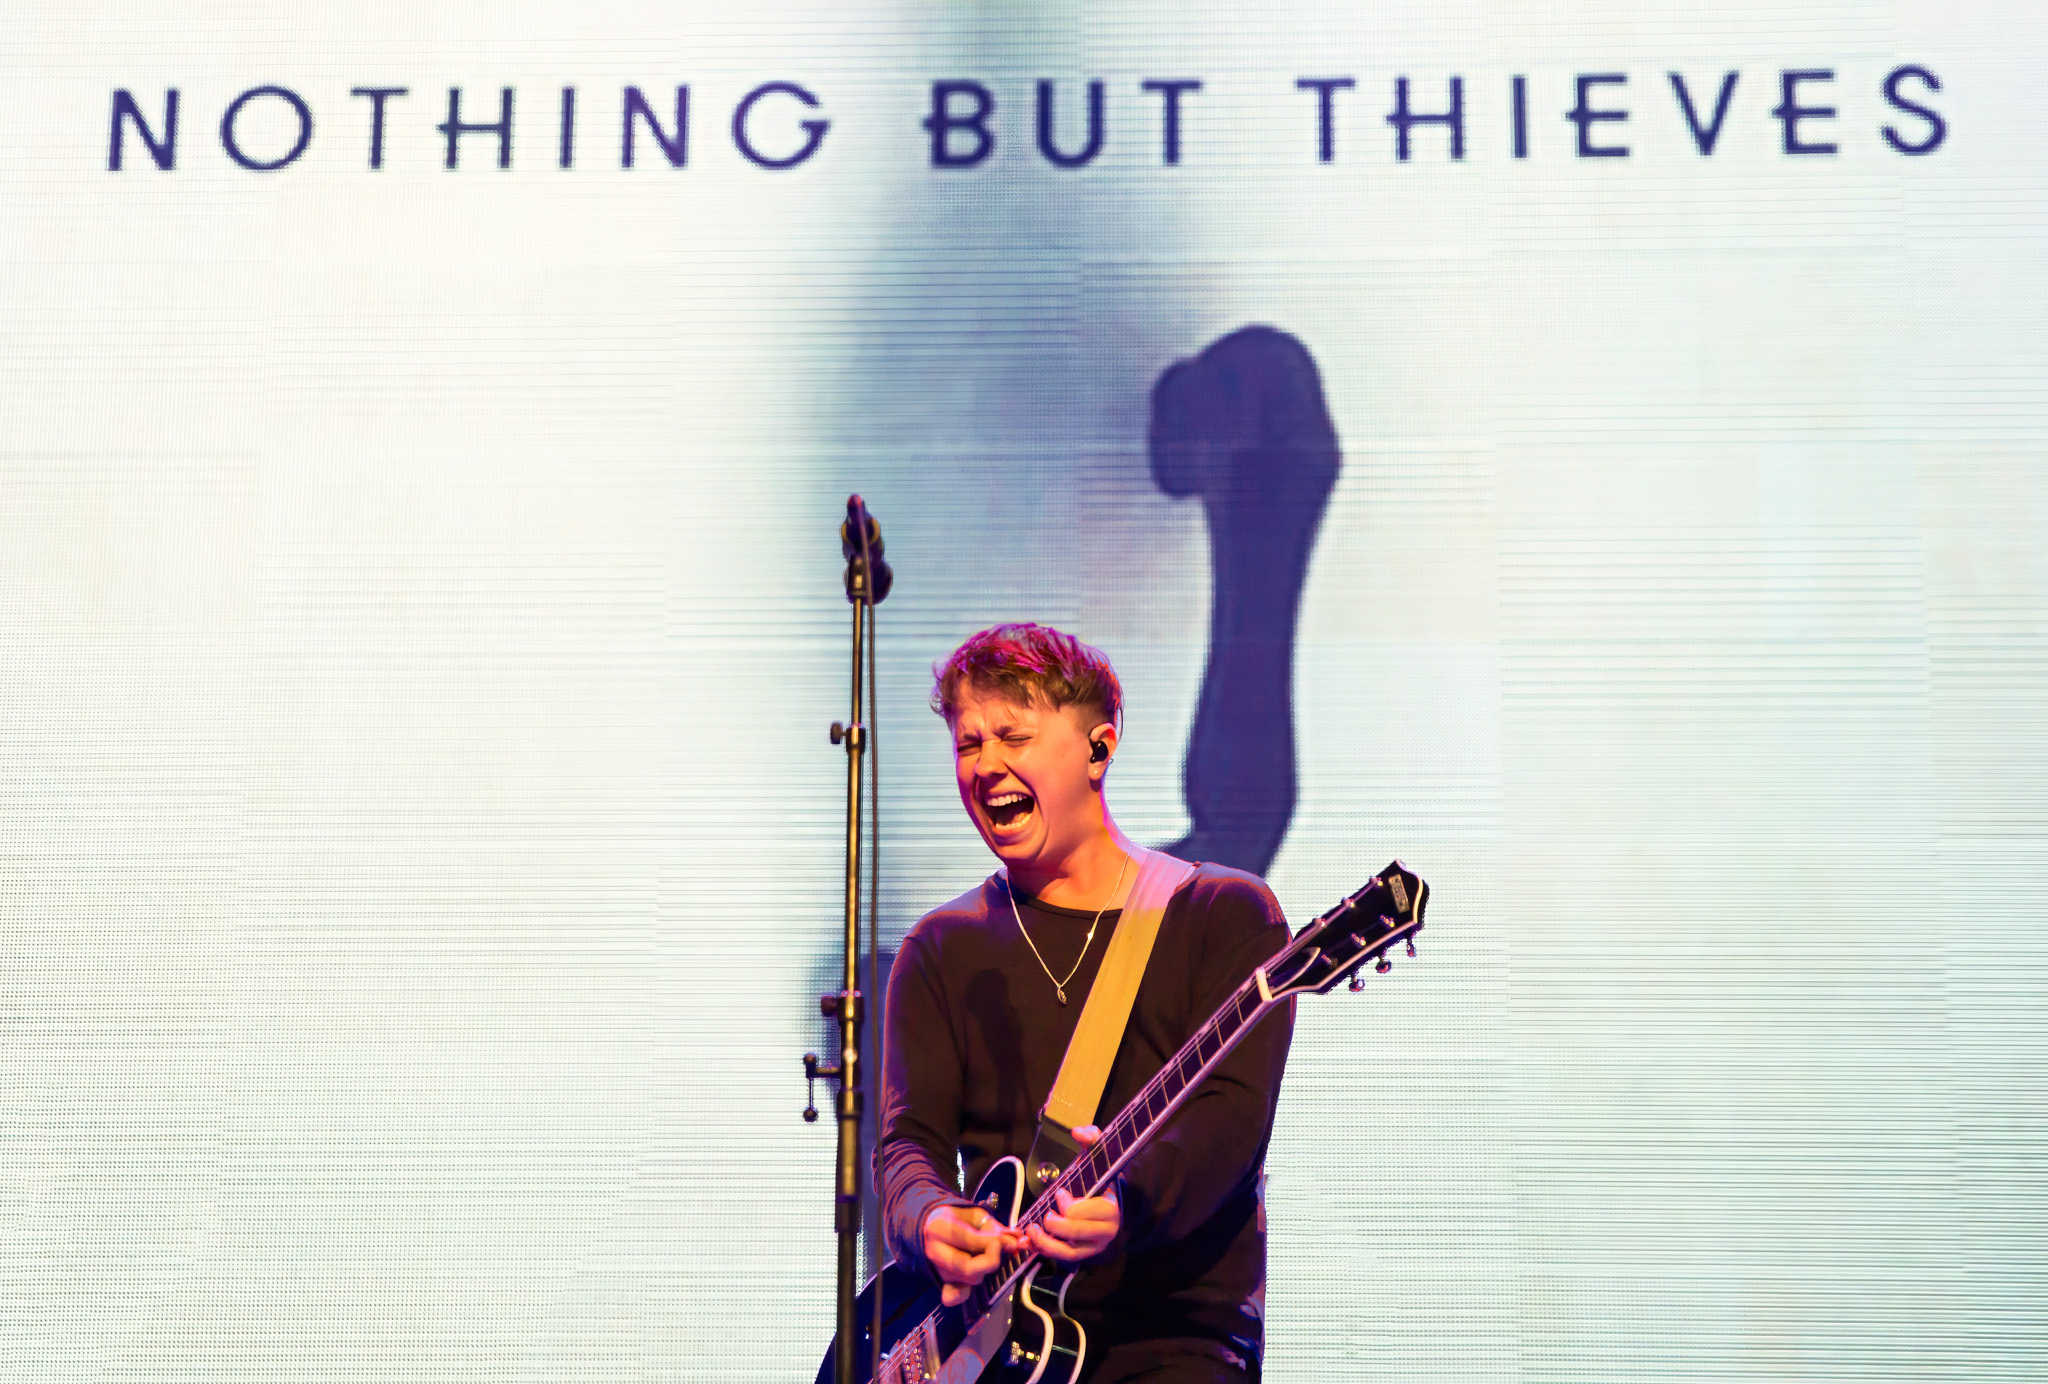 Nothing but Thieves by Bullet-ray Photography